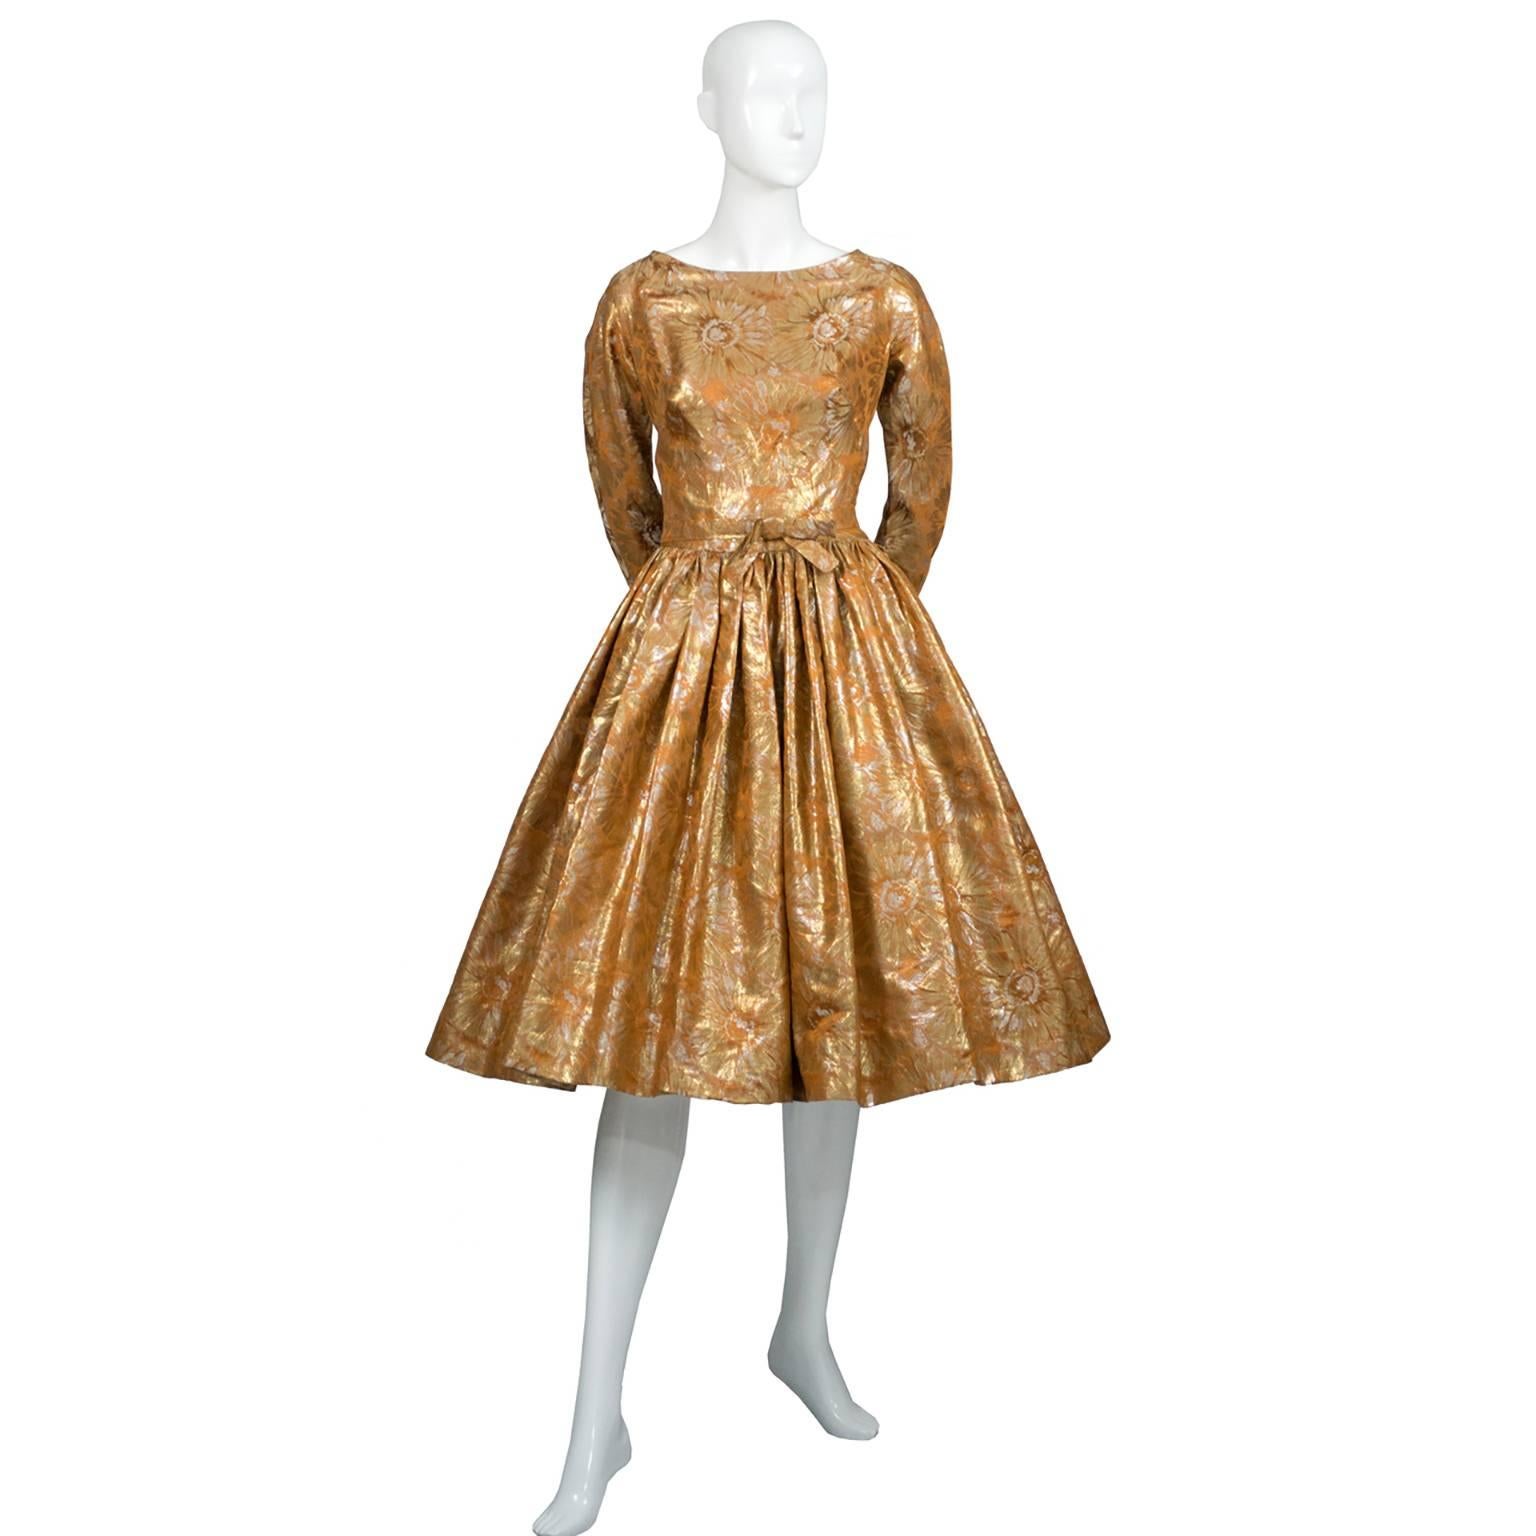 This is a dazzling copper and gold lame floral brocade vintage dress with splashes of orange. This fabulous metallic dress was purchased at Isabell Gerhart, a high end woman's boutique in Houston, Texas in the late 1950s or early 1960's. The dress